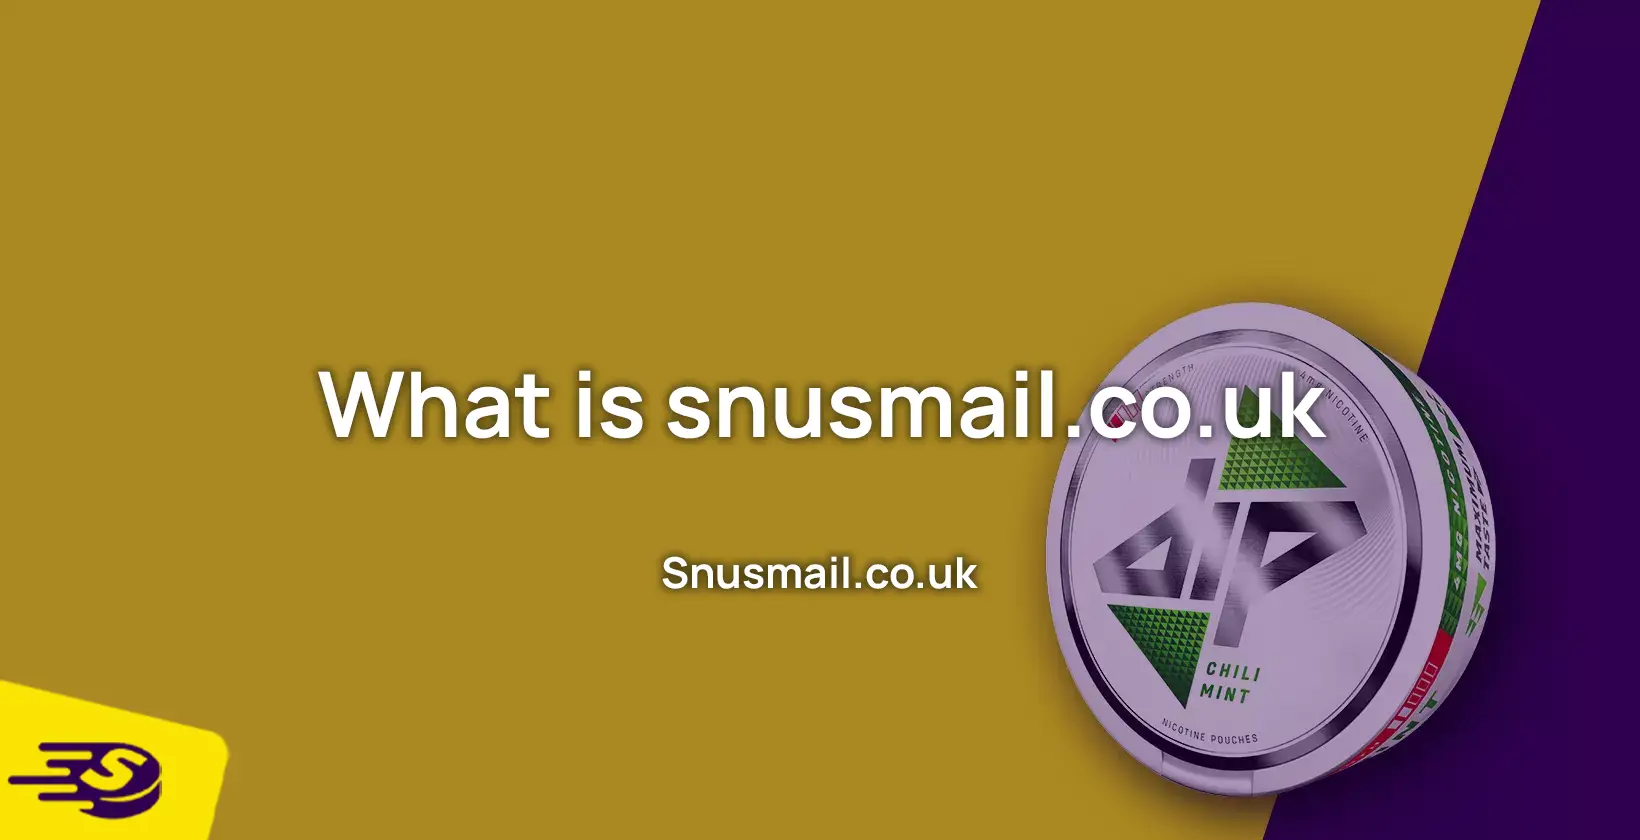 What is snusmail.co.uk